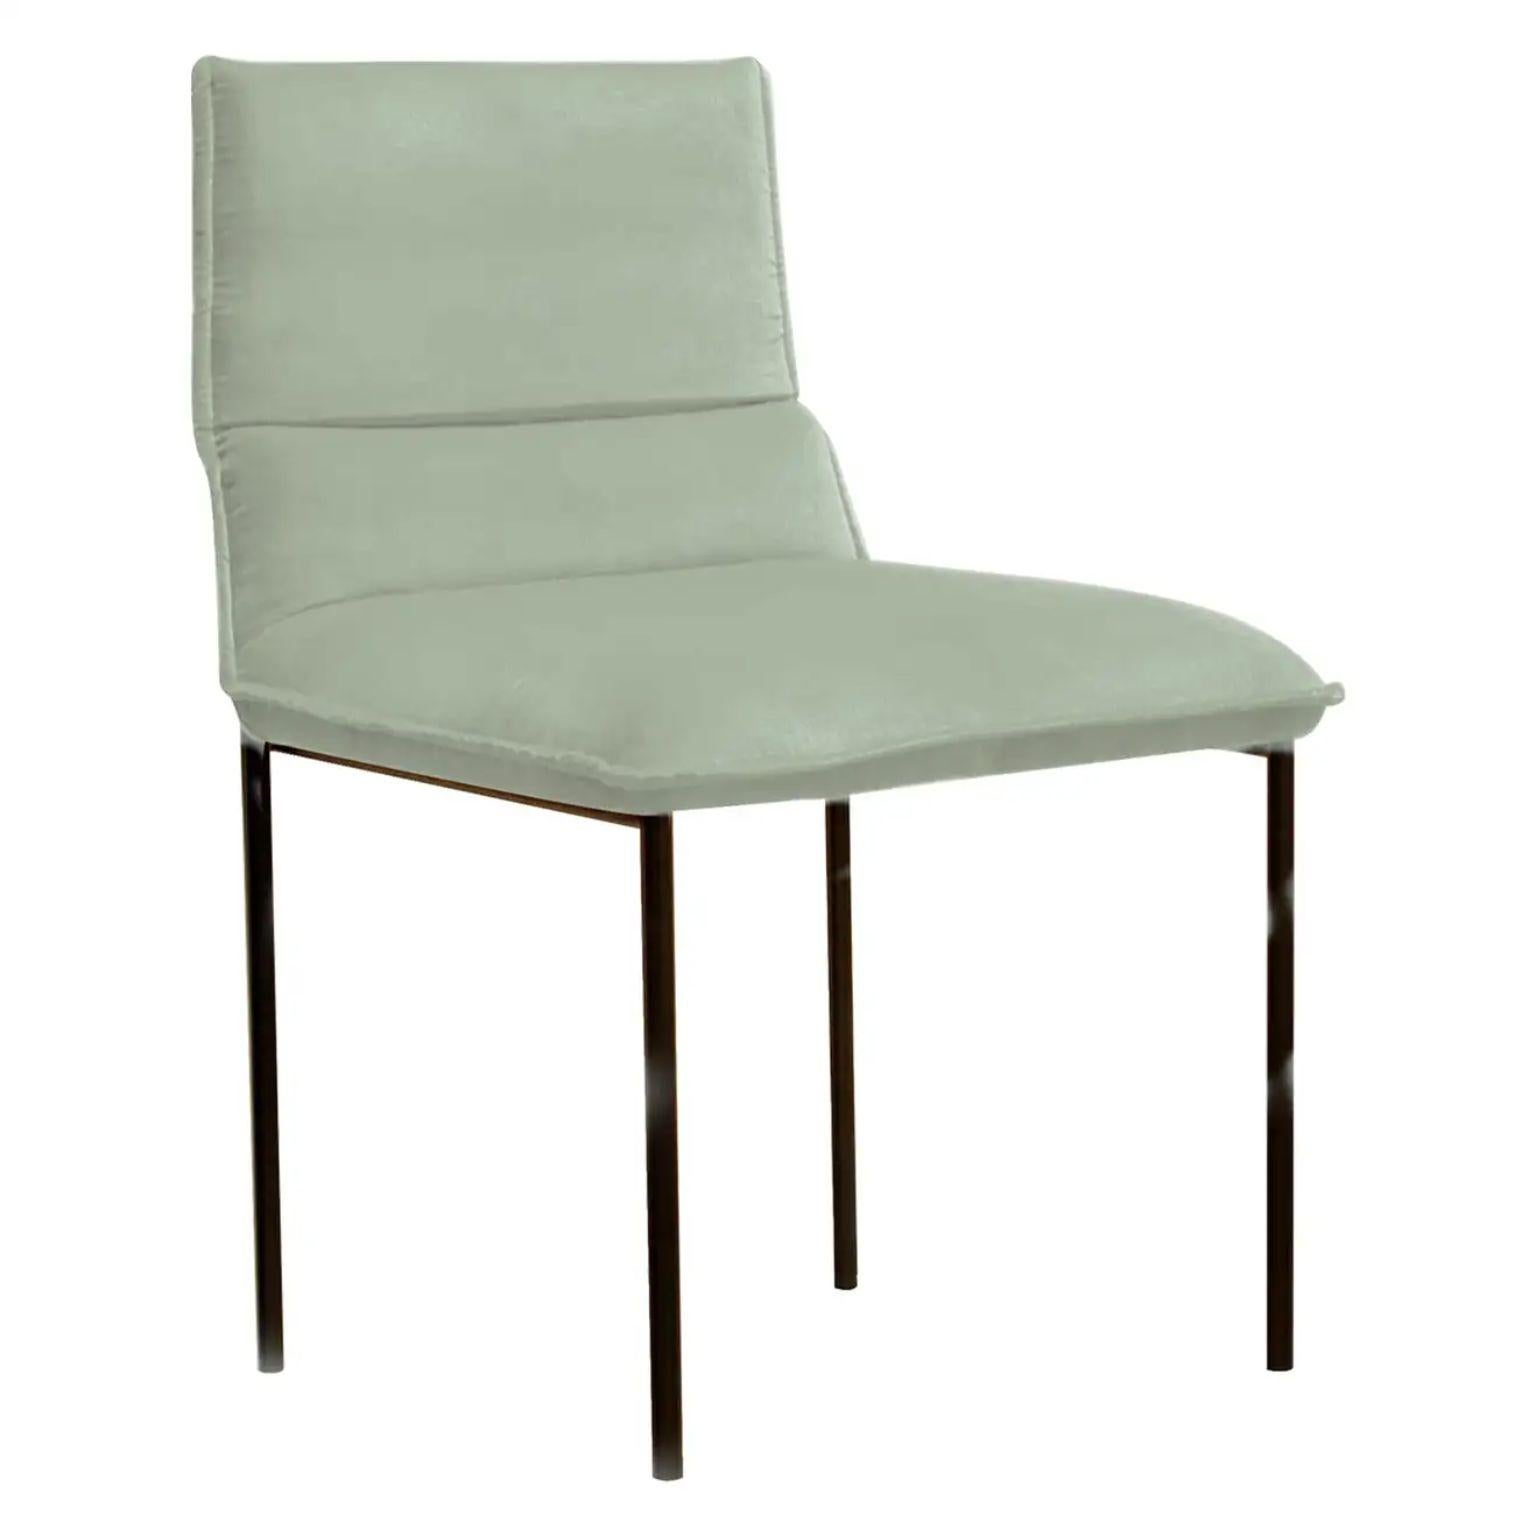 Unique Jeeves chair by Collector
Materials: Antracite Metal lacquerd frame structure. Fabric.
Dimensions: W 45 x D 52 x H 80 cm
SH 48 cm 

The Jeeves series features sophisticated details and great versatility.
The elegant range of fabrics and